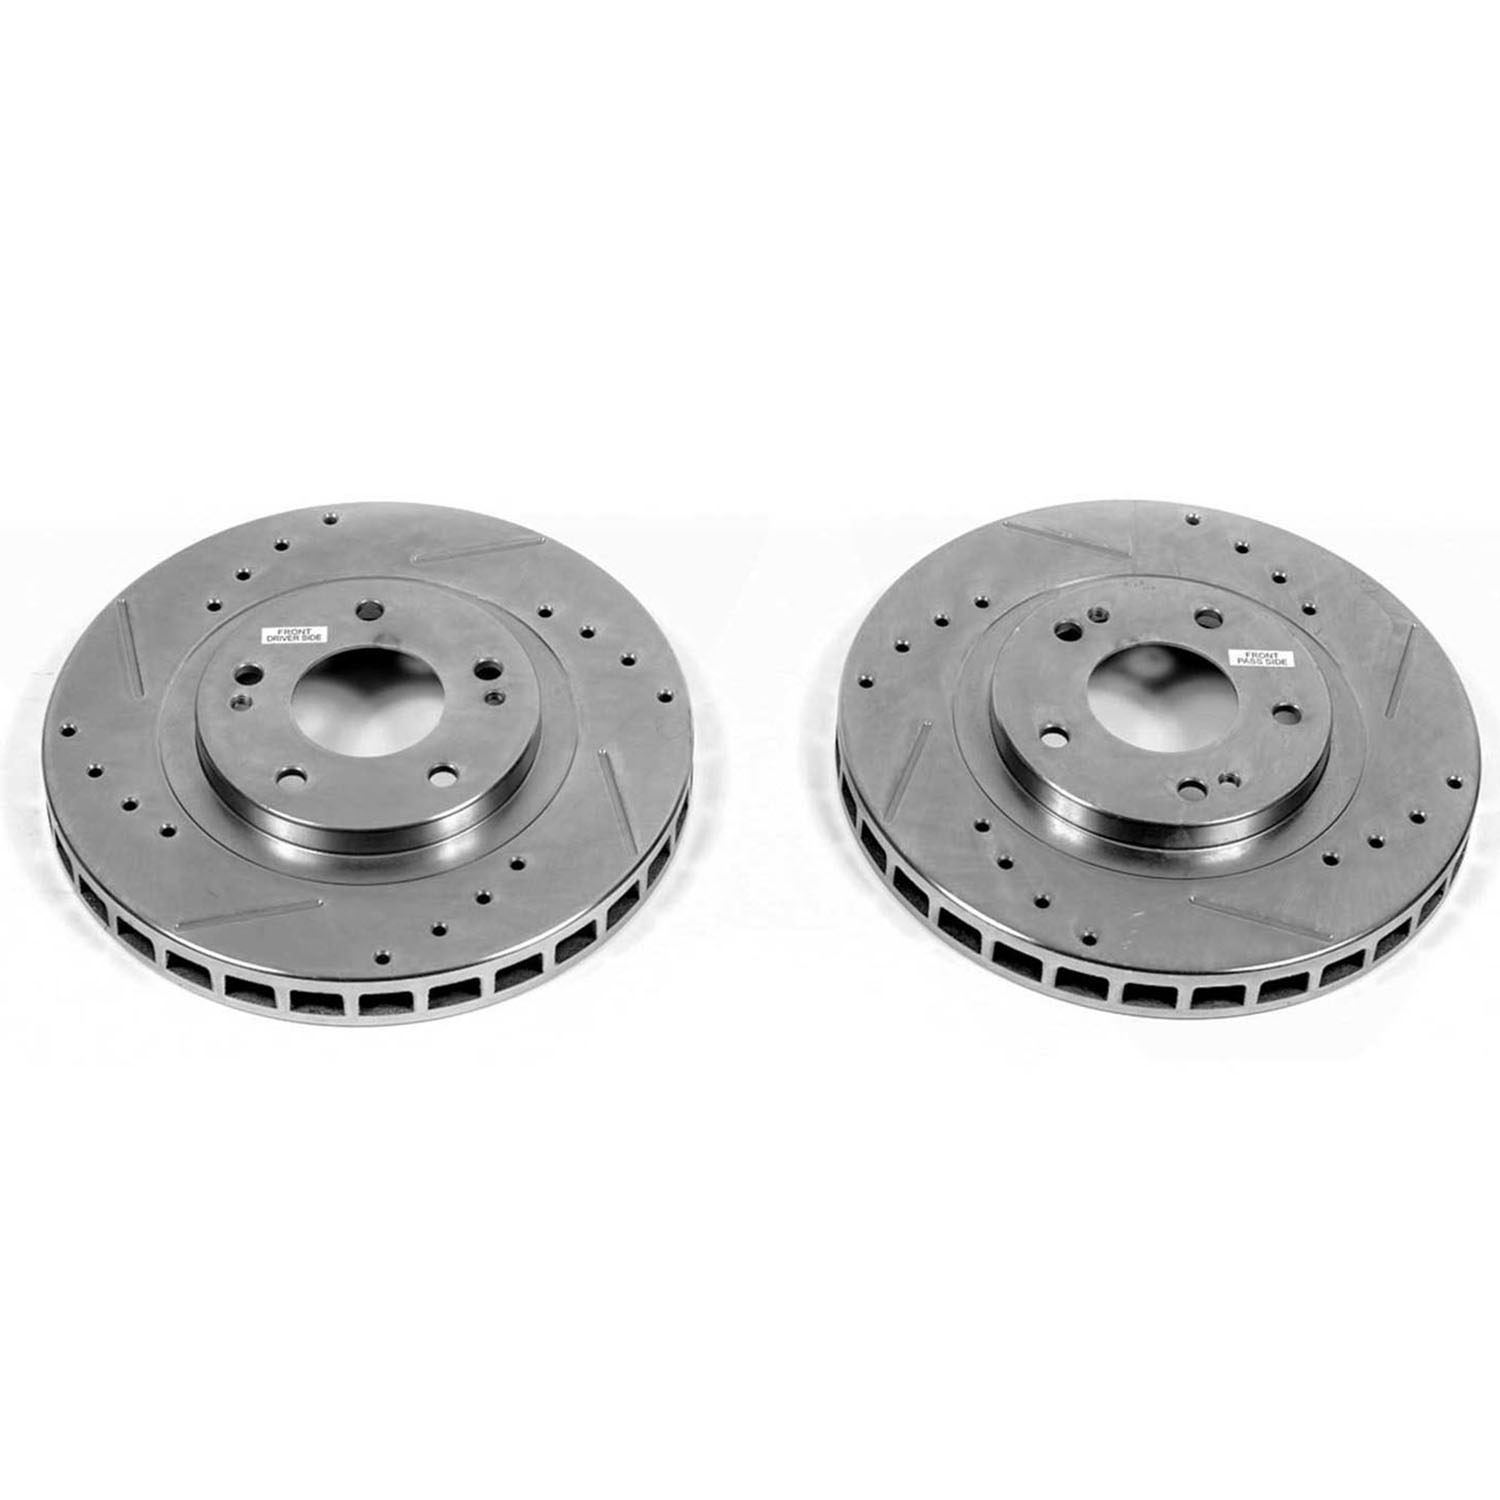 Details about   SP Performance Rear Rotors for 1994 100 QUATTRODrilled Slotted F01-2154.946 